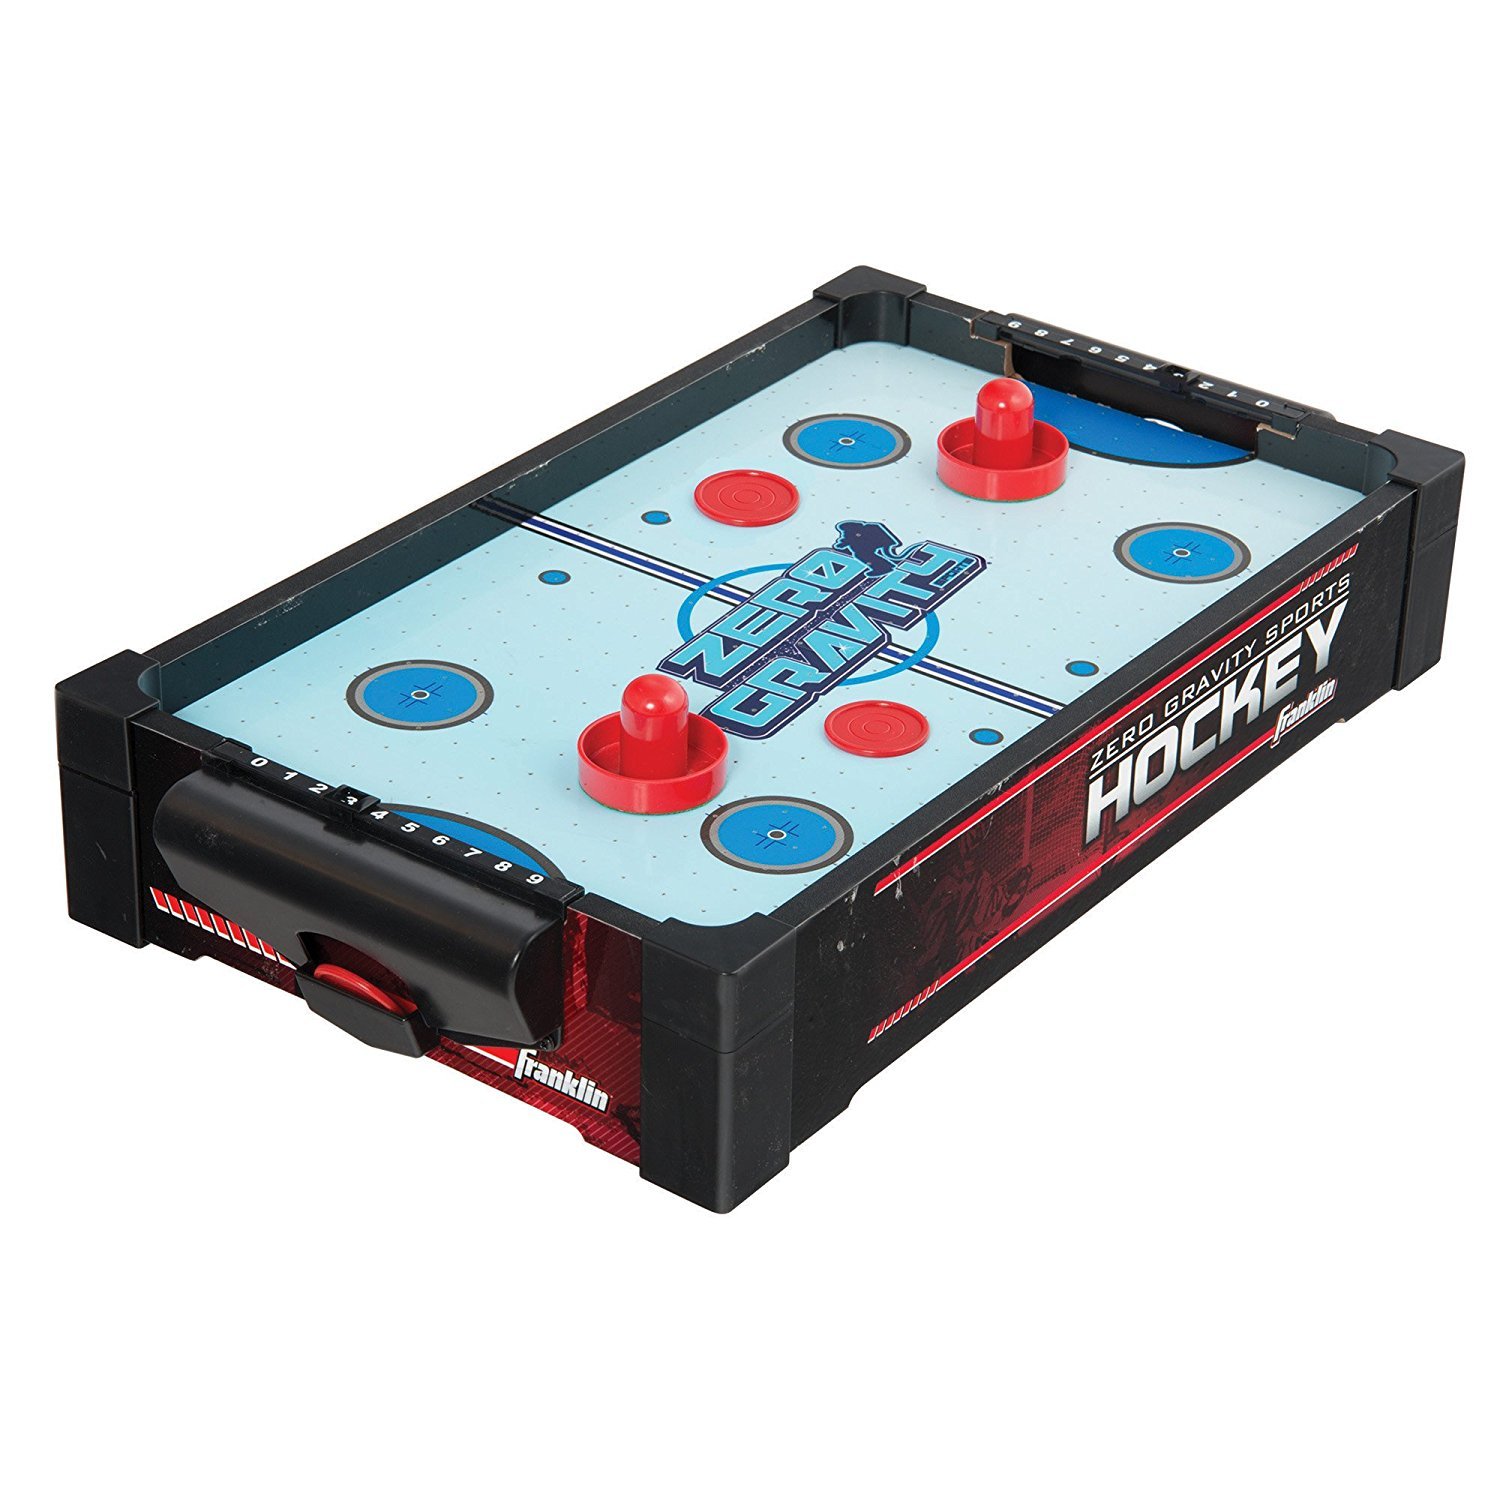 Franklin Sports Zero Gravity Air Hockey table with its accessories